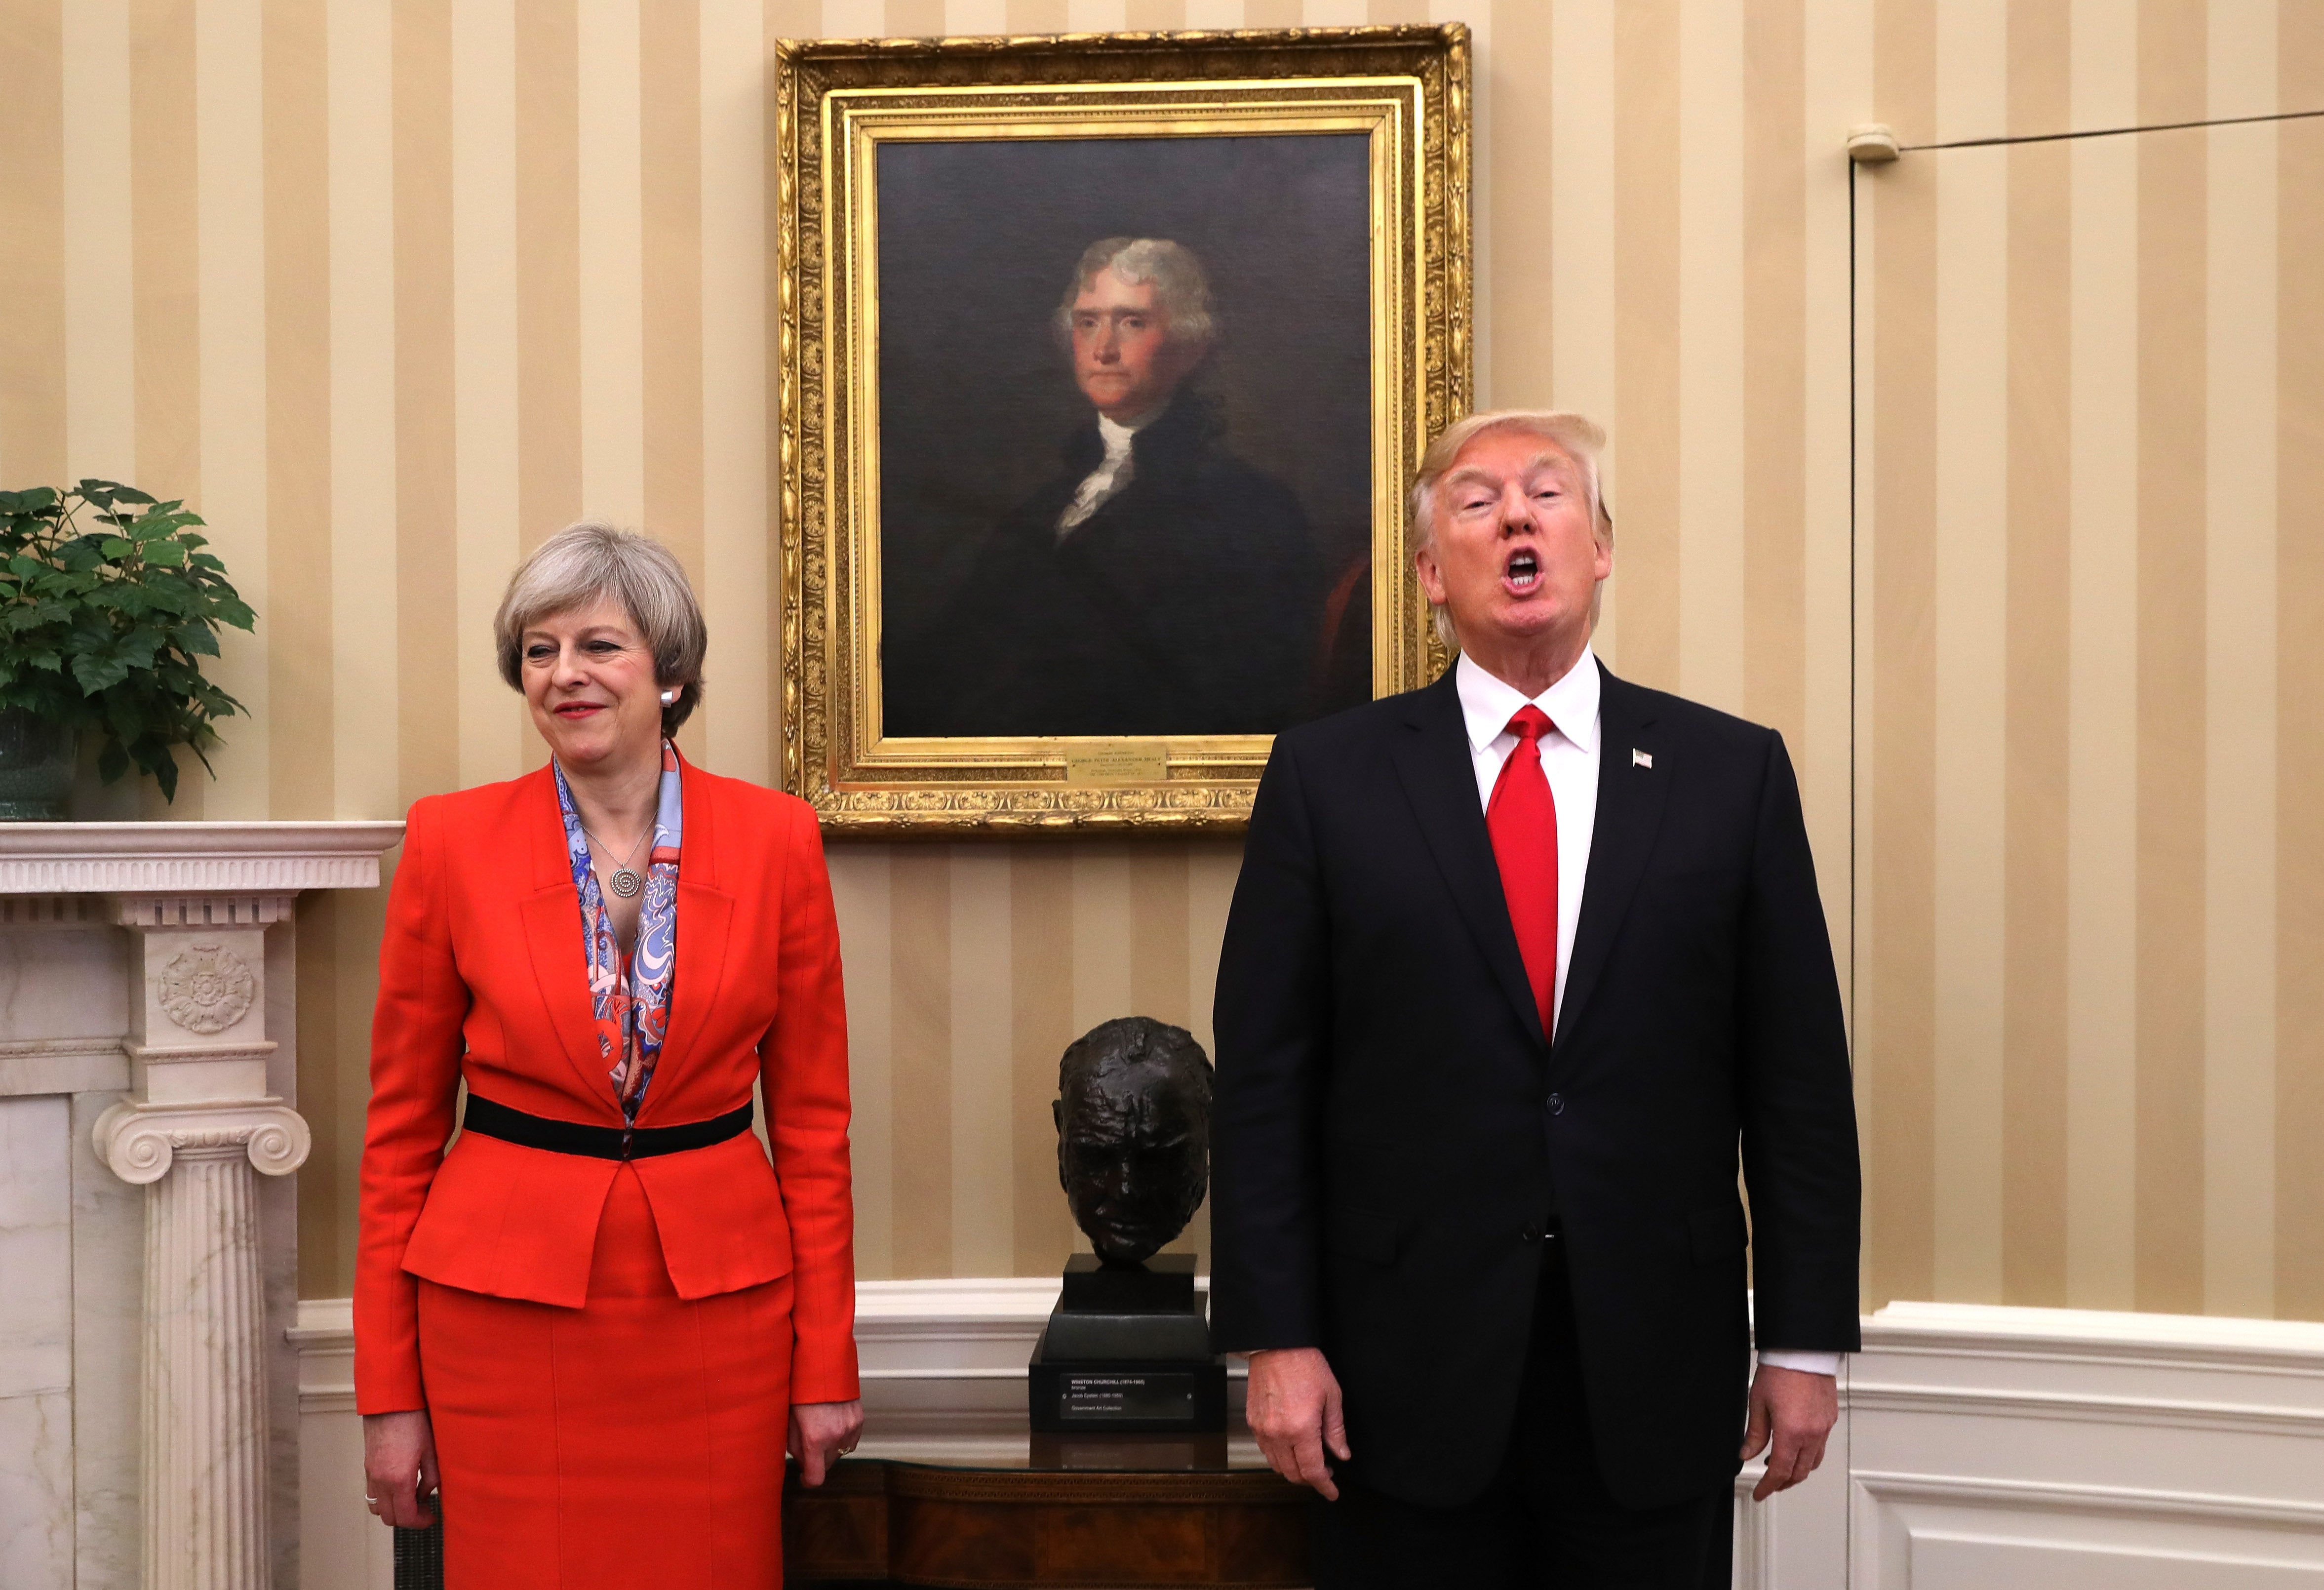 Theresa May with Donald Trump in the White House Oval Office, 27 January 2017